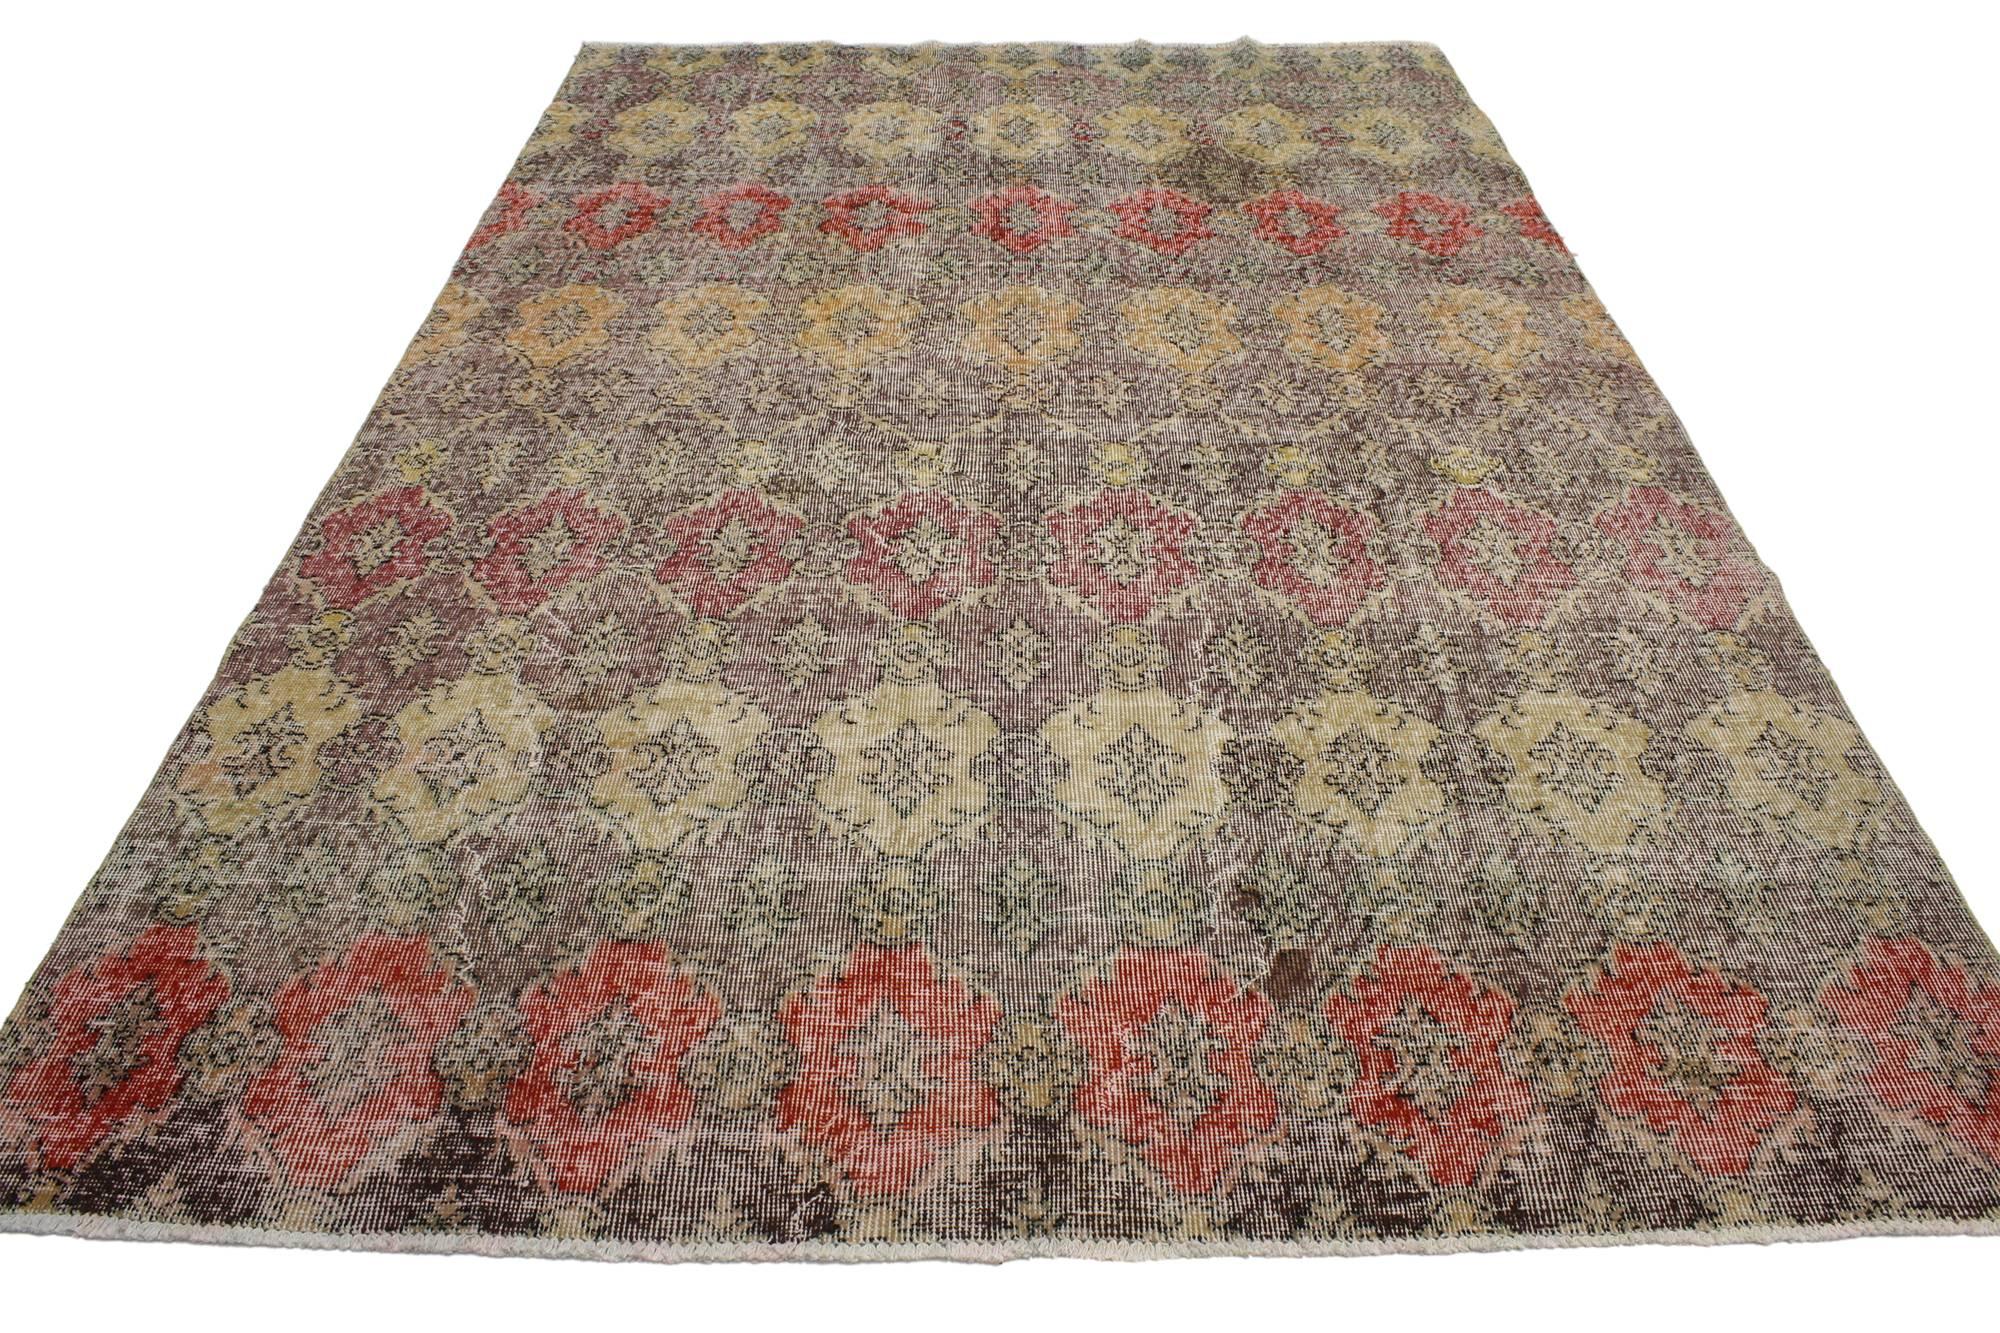 52006, Zeki Muren Distressed Vintage Turkish Sivas Rug With Industrial Art Deco Style, 06'00 x 08'11. This distressed vintage Turkish Sivas rug with modern Industrial Art Deco style features an all-over geometric pattern in warm earth-tone colors.